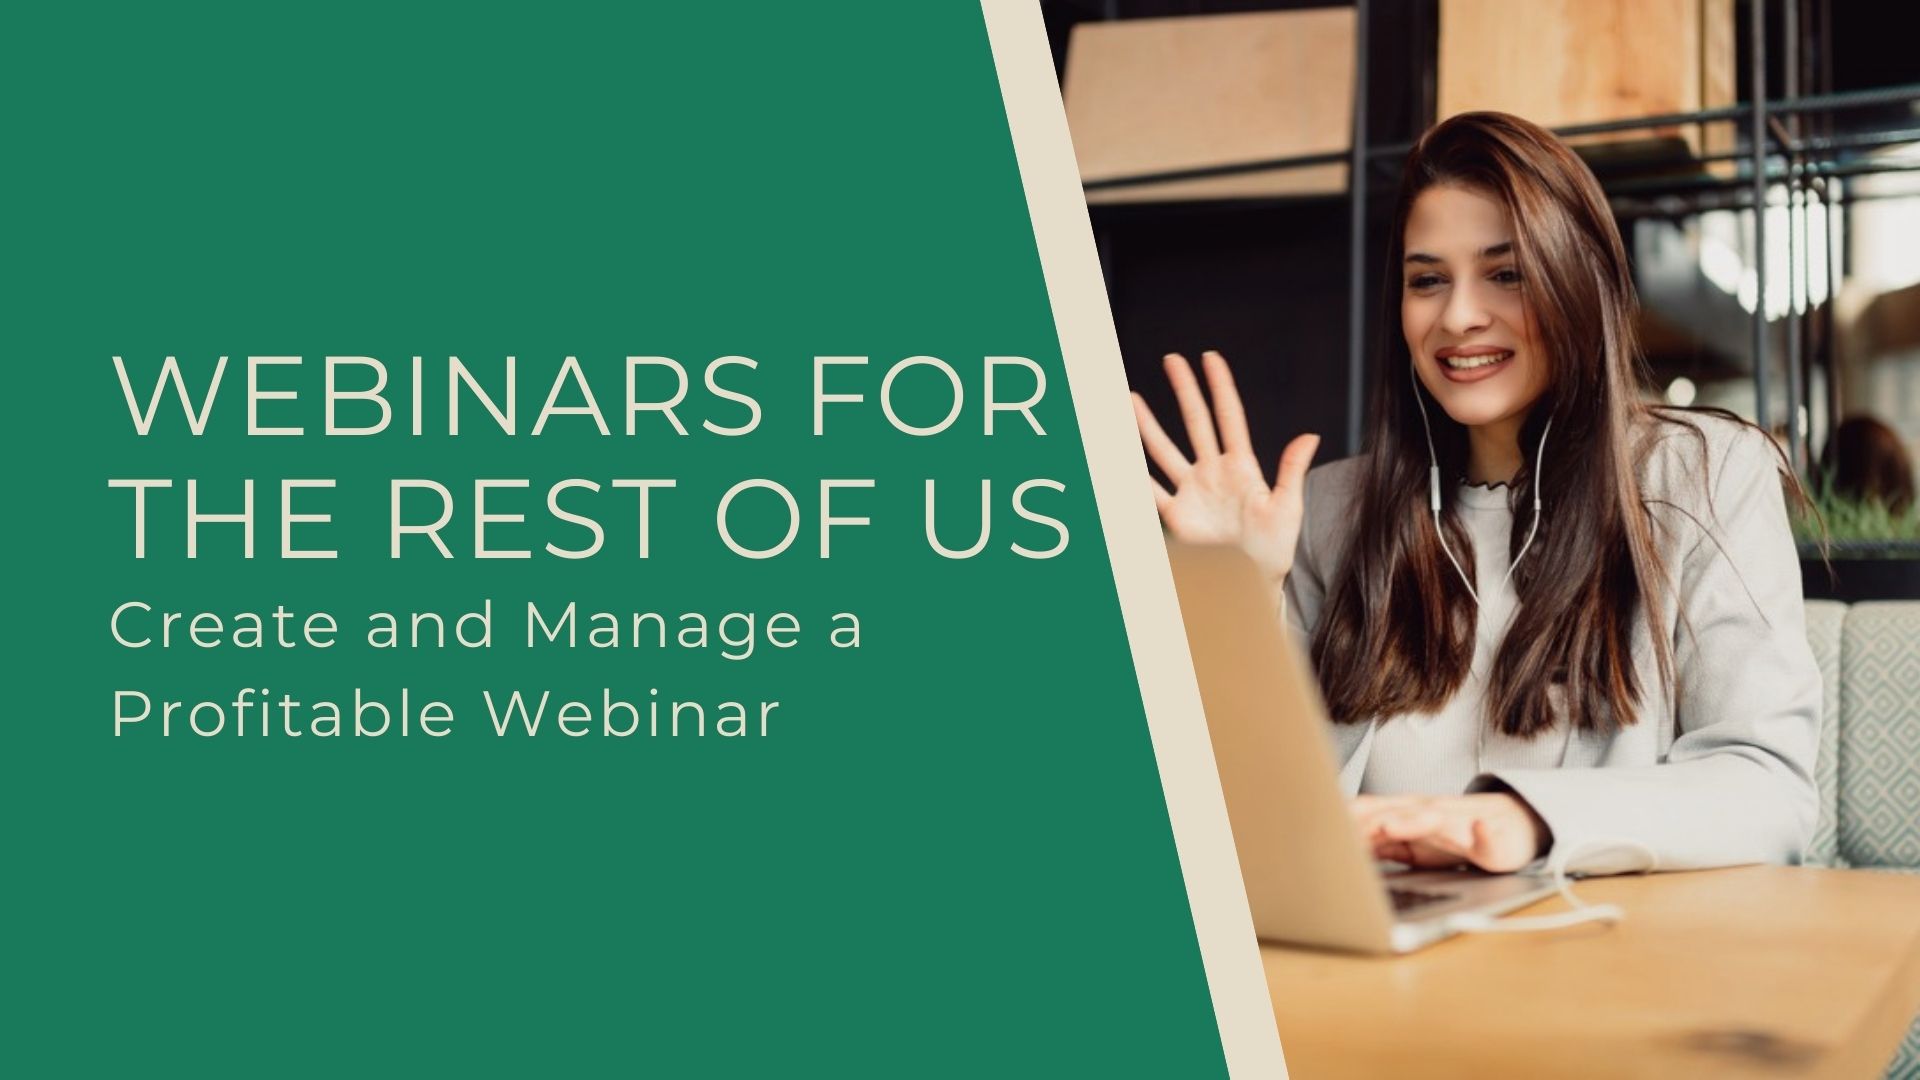 Webinars for the Rest of Us Cover